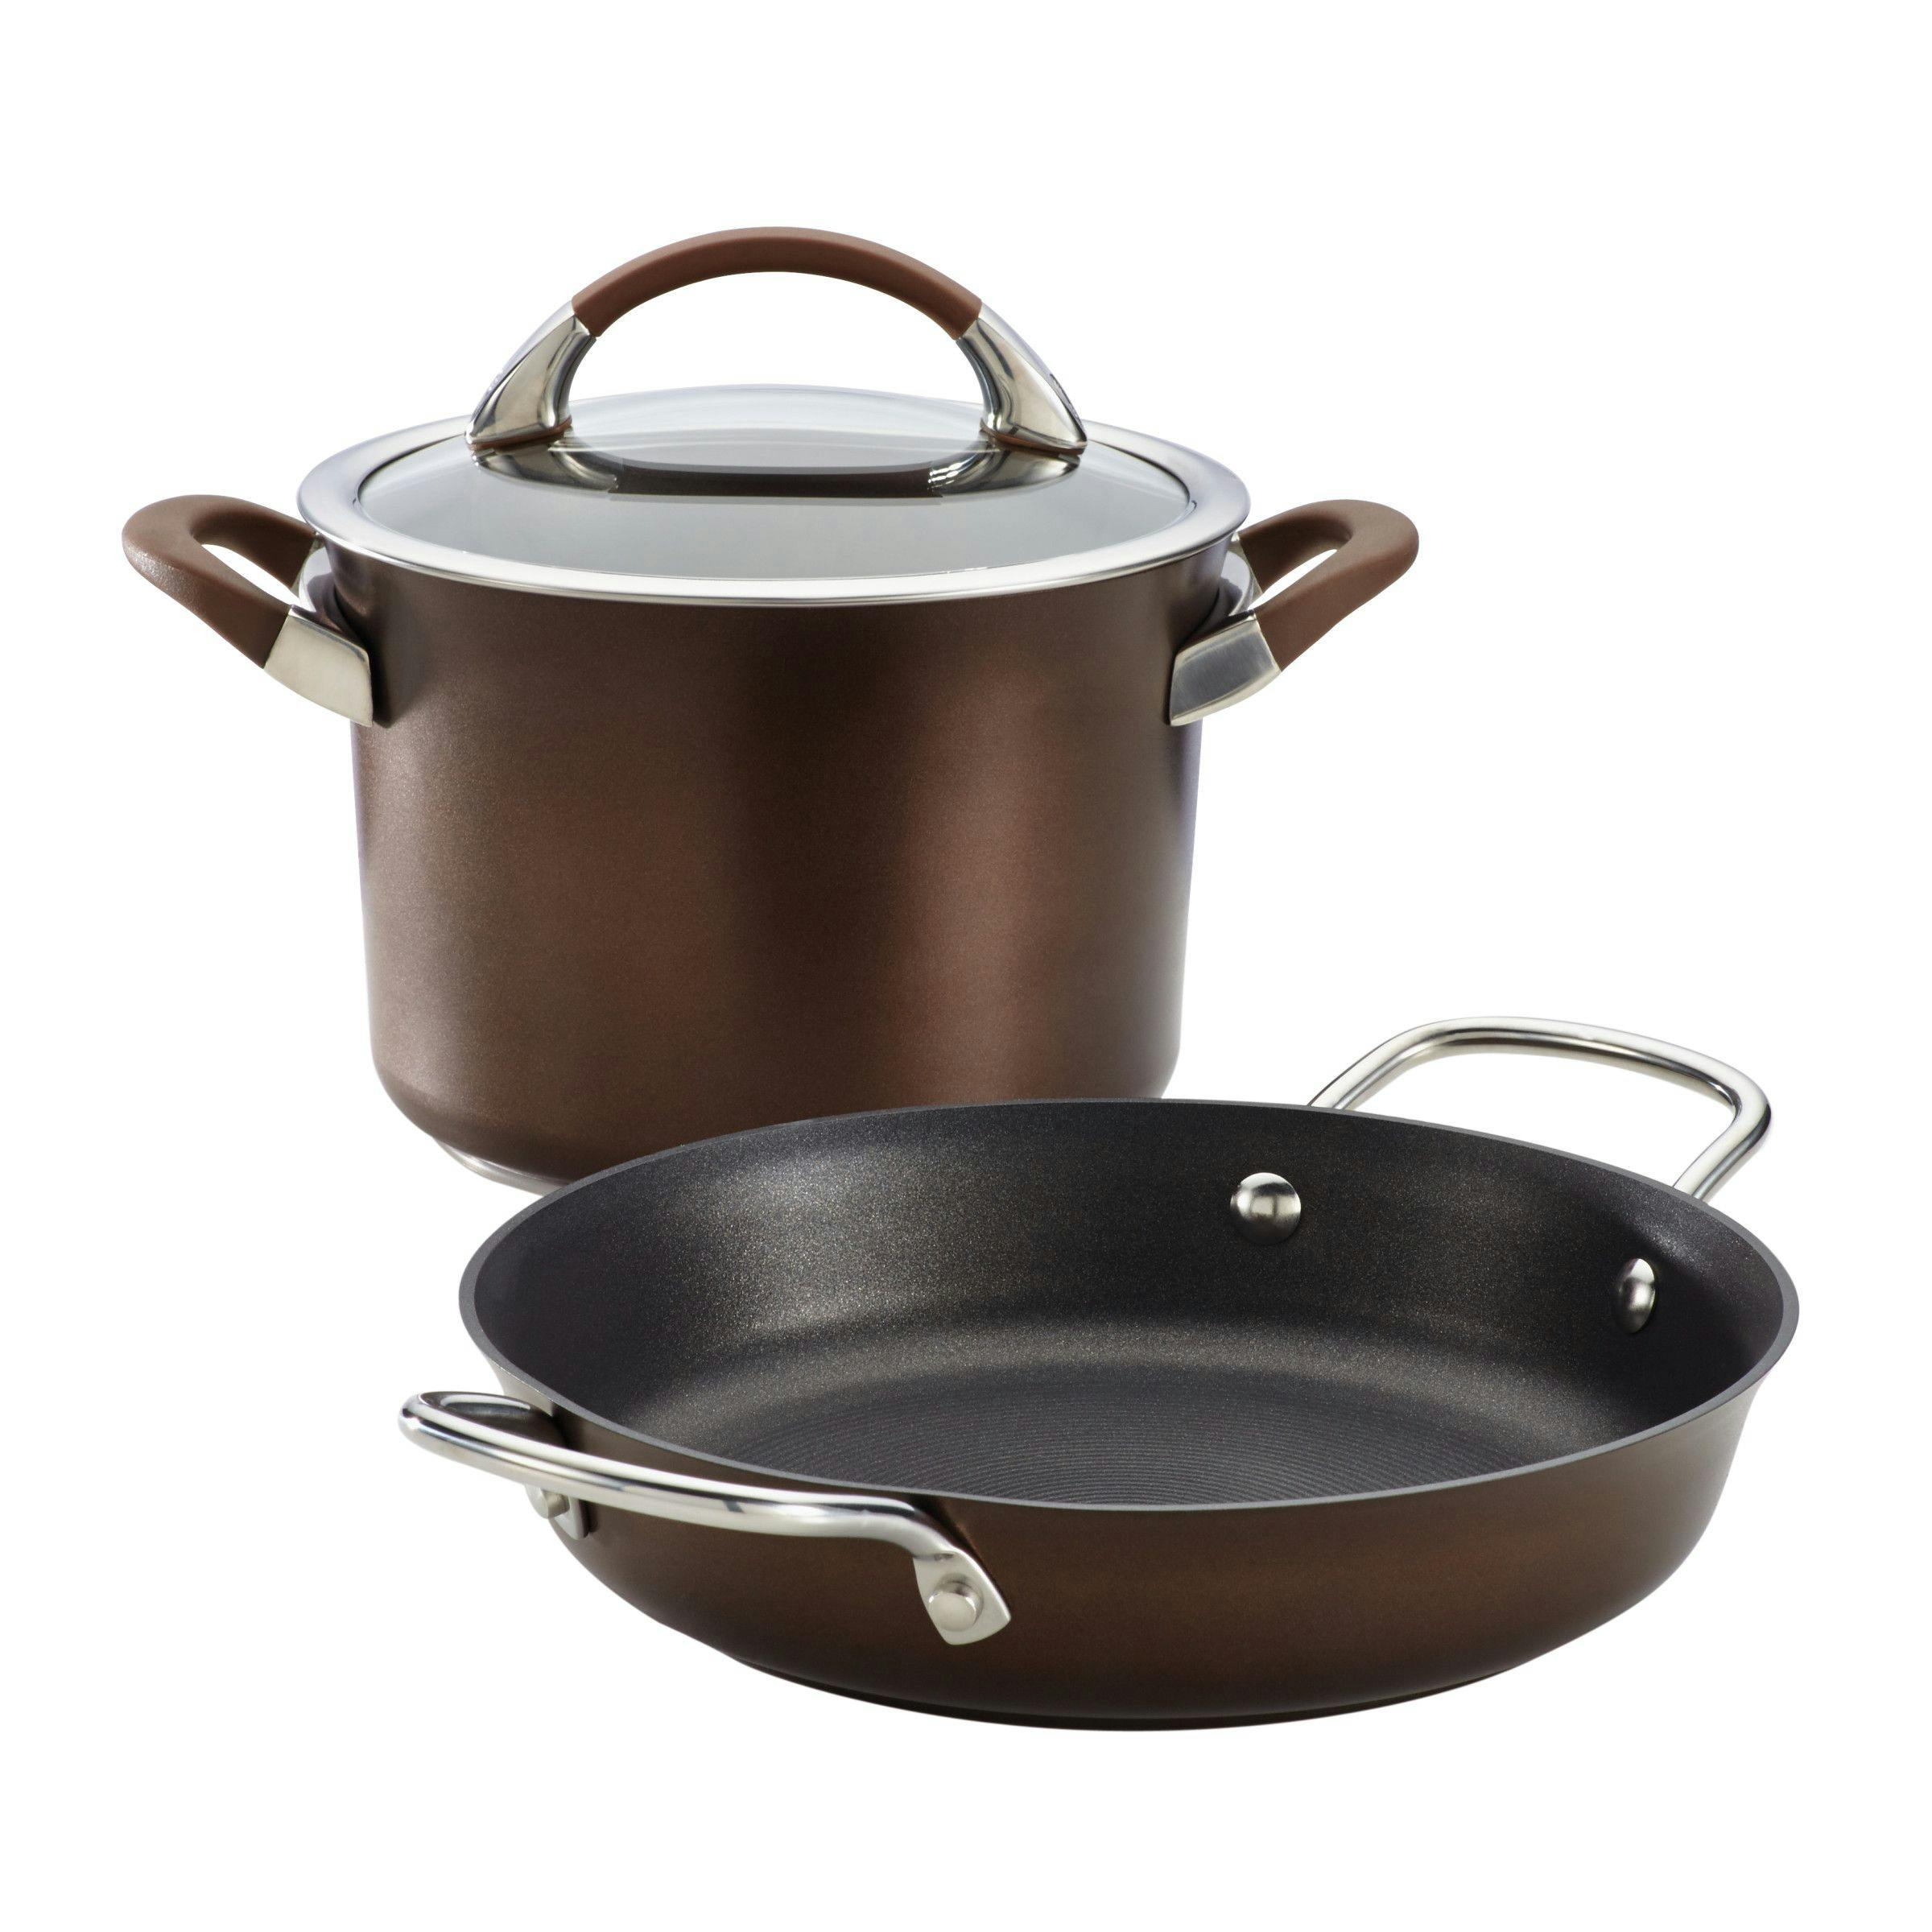 Circulon Symmetry Hard-Anodized Nonstick Cookware Induction Pots and Pans Set, 3-Piece, Chocolate